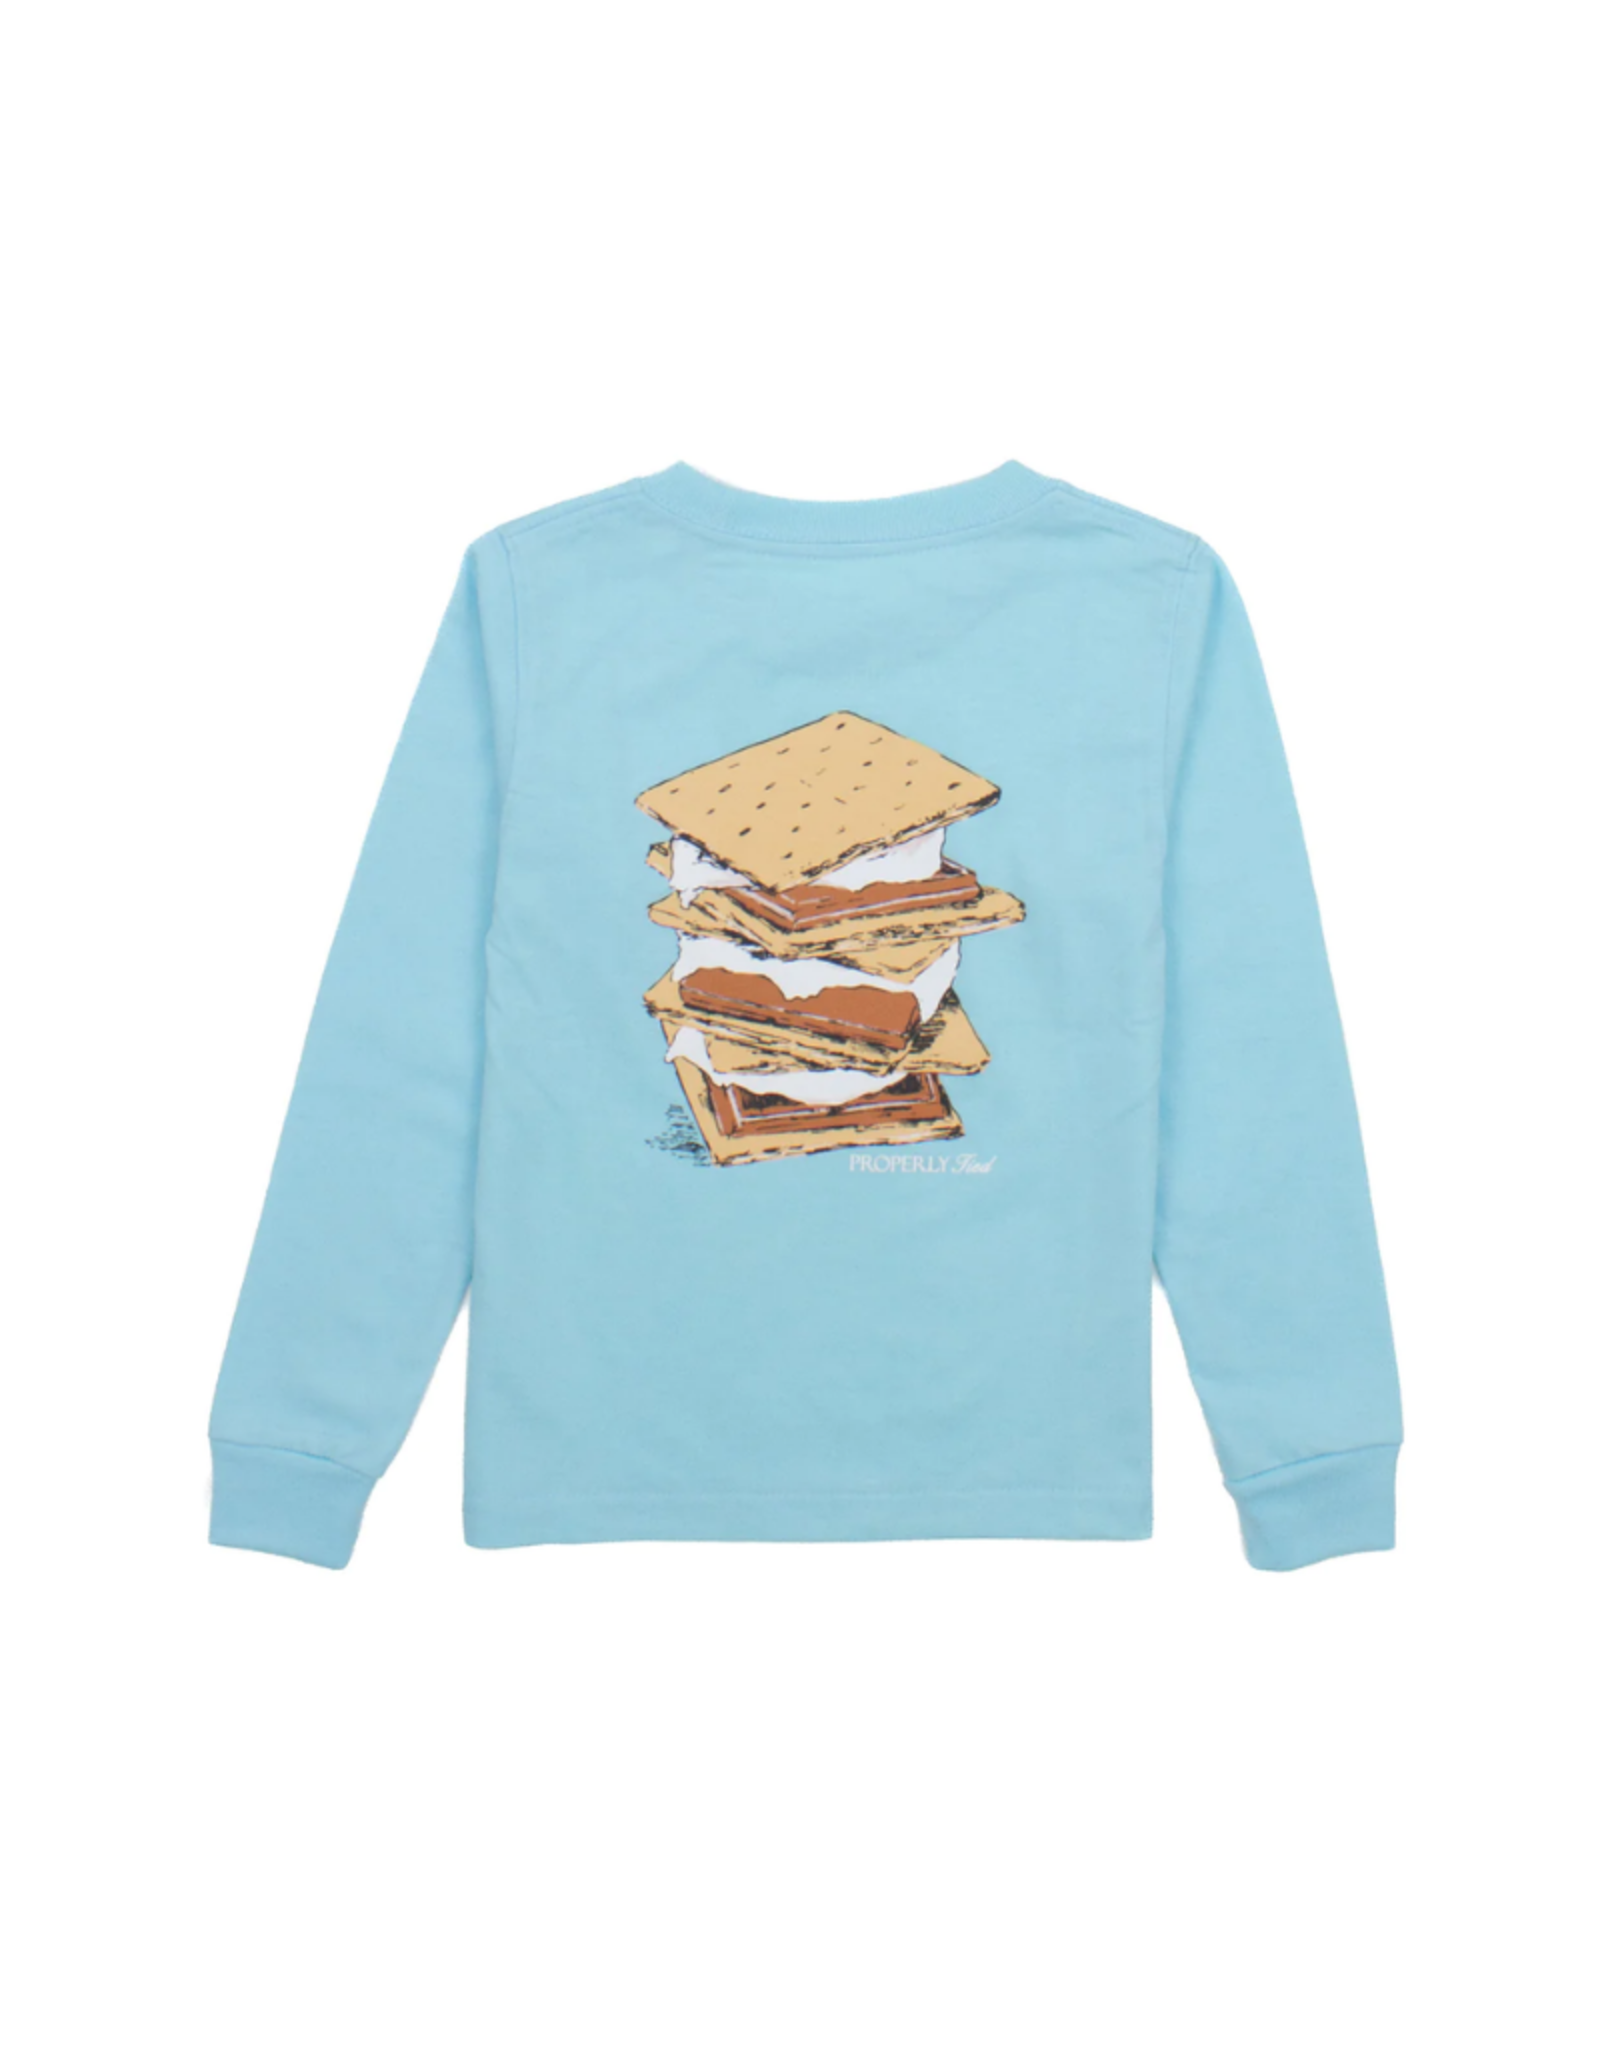 Properly Tied S'Mores LS Powder Blue